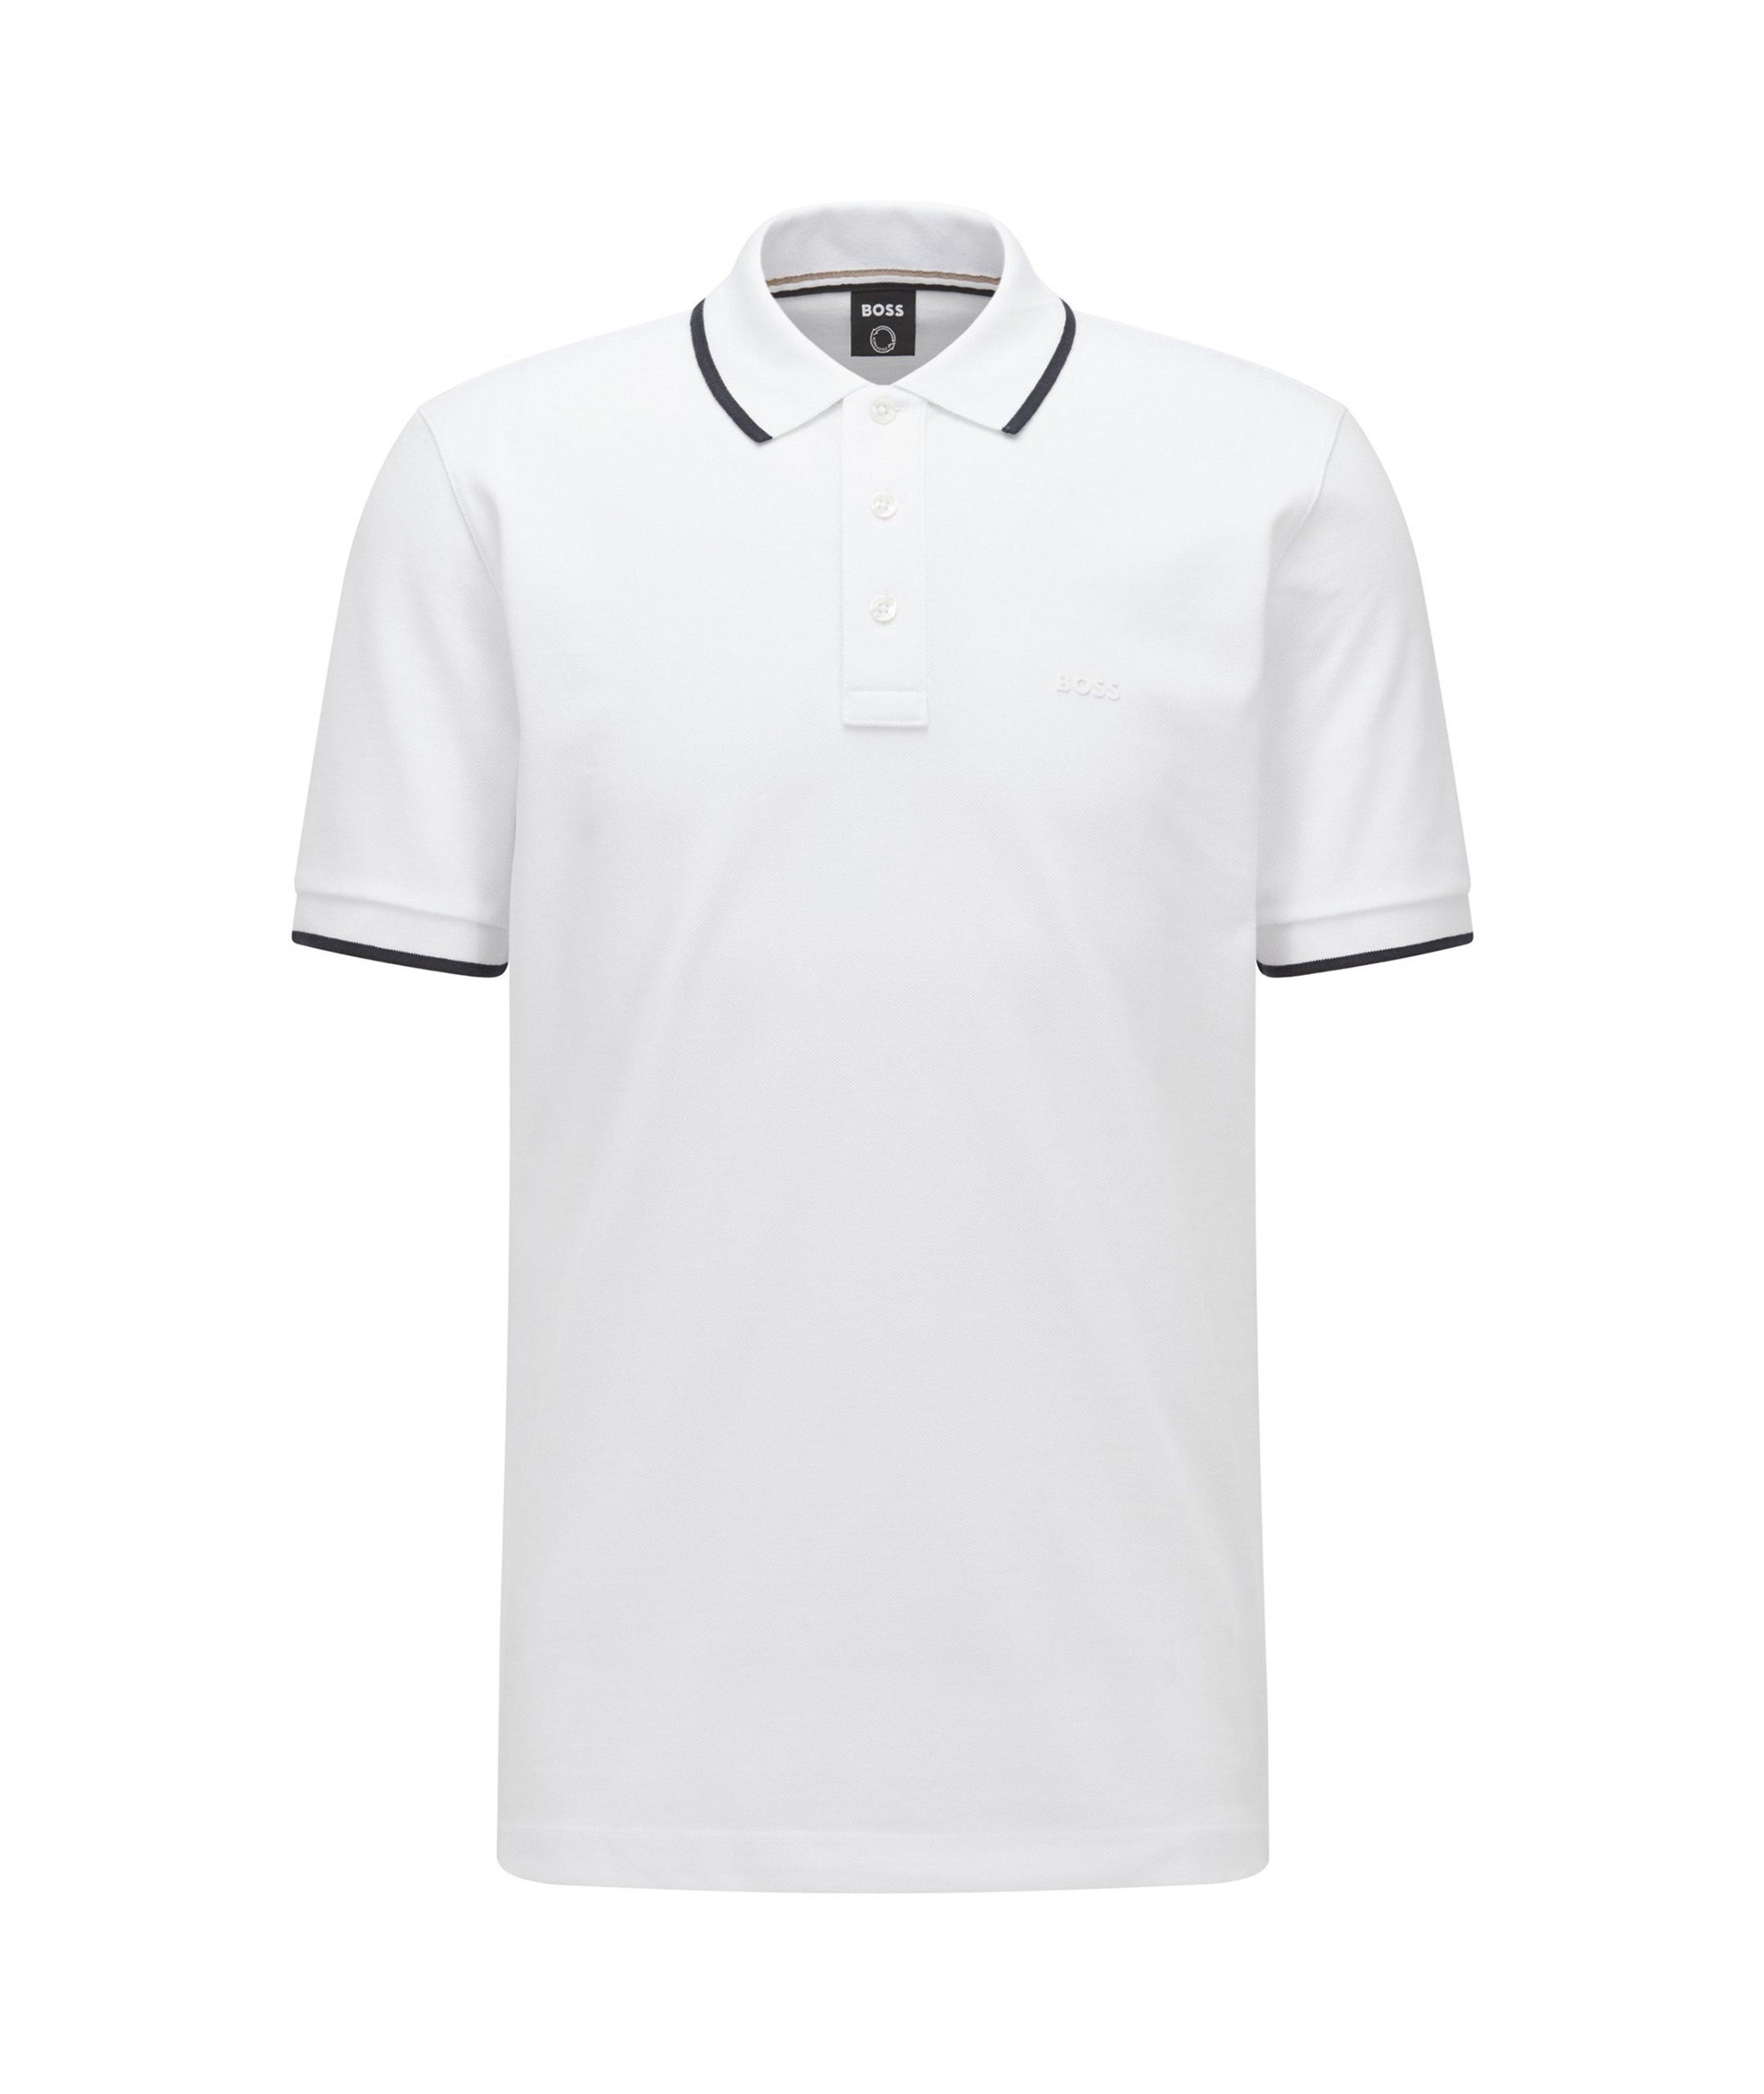 Contrast Tipped Logo Cotton-Blend Polo T-Shirt image 0